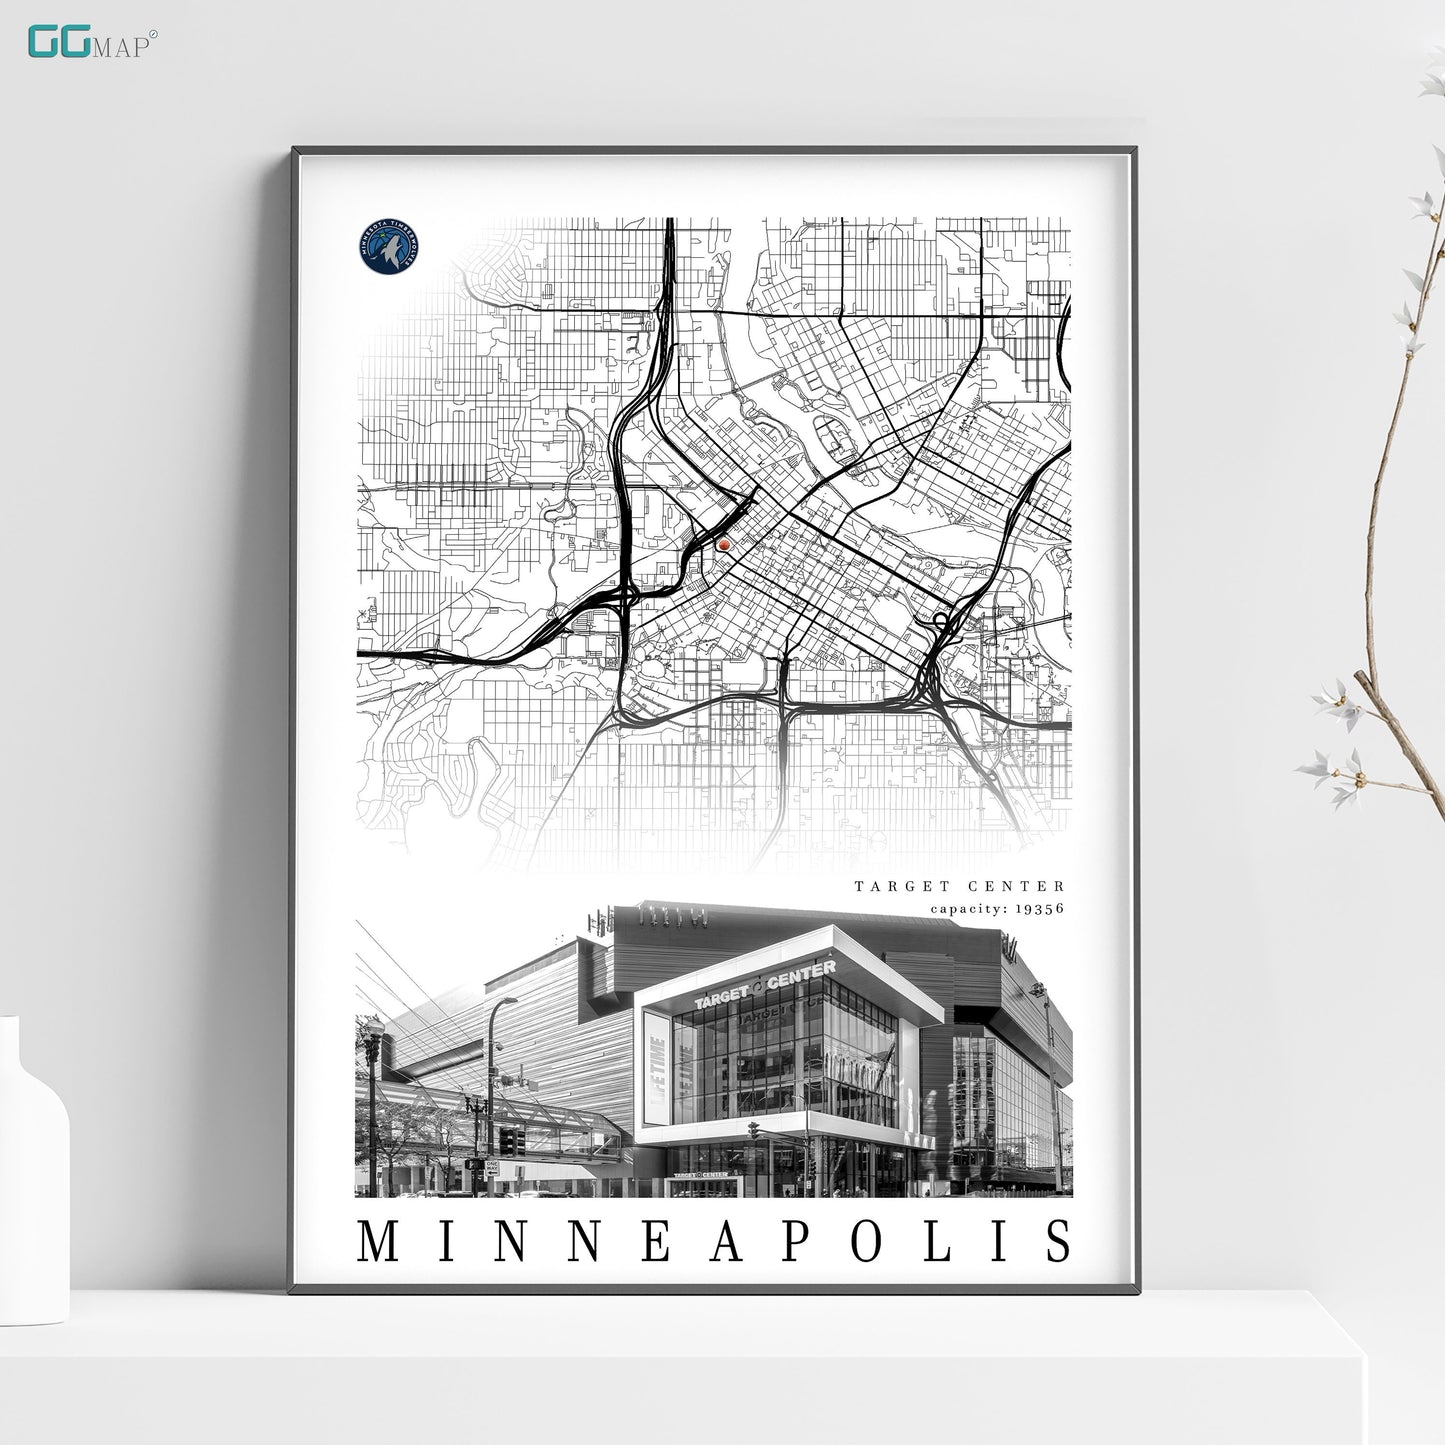 City map of MINNEAPOLIS - Target Center - Home Decor Minneapolis - Target Center wall decor - Minneapolis poster - Print map